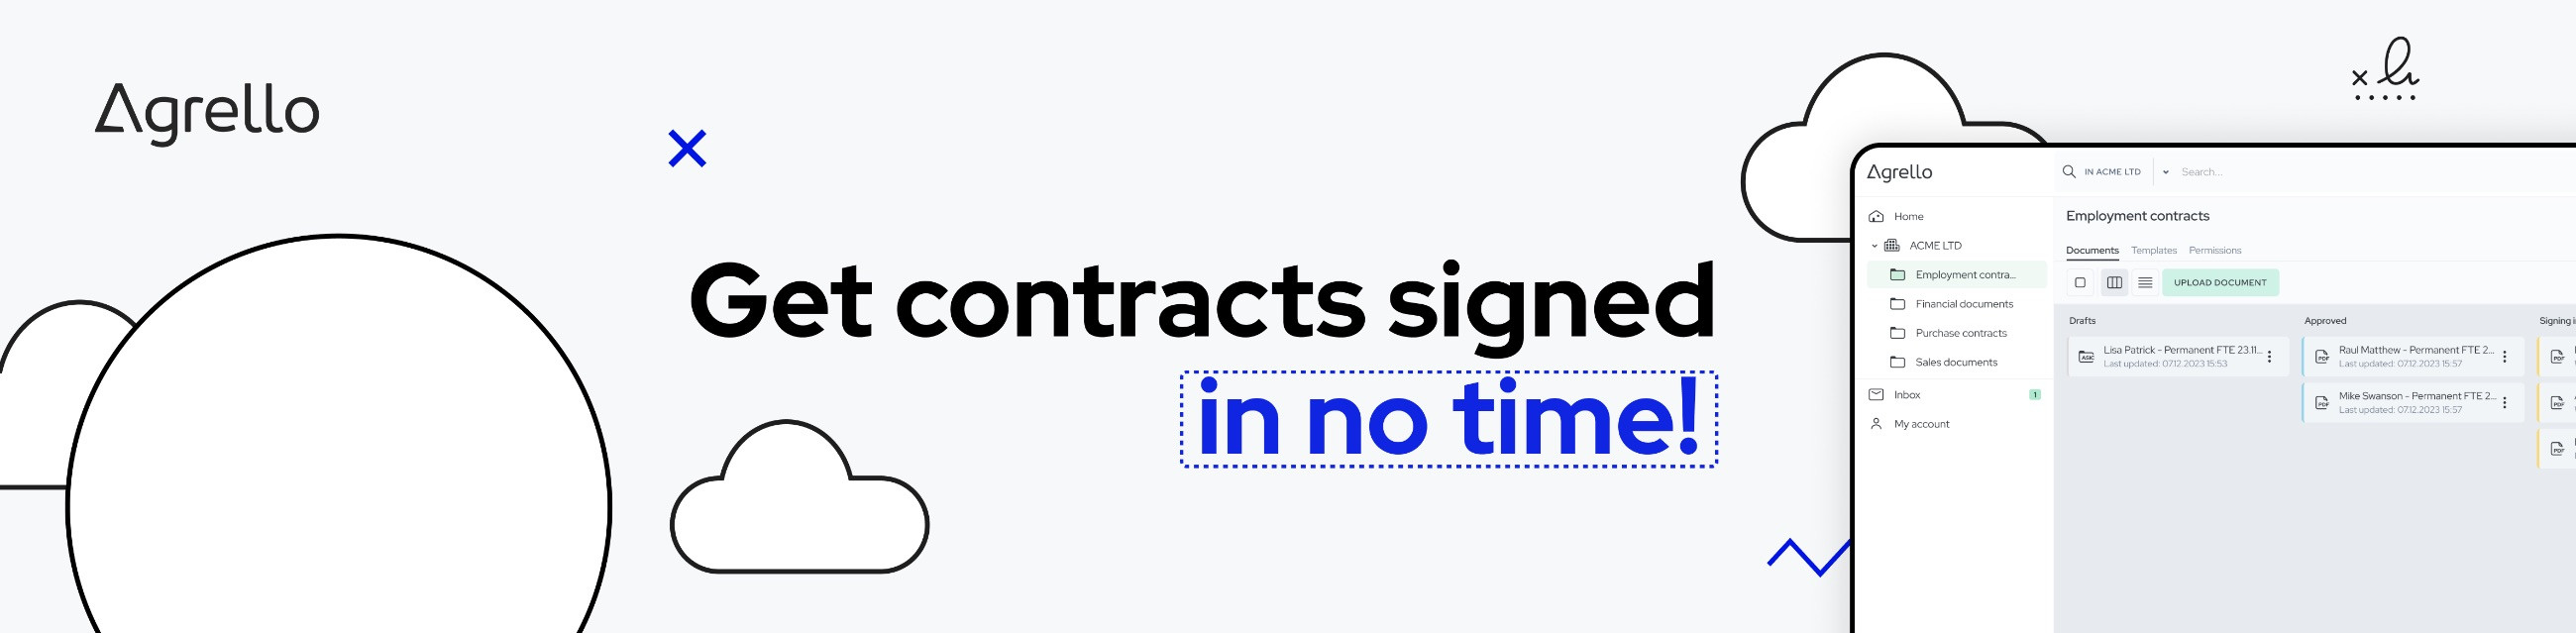 Agrello is a contract creation, signing and management platform for SMEs, that helps to discover and eliminate legal bottlenecks and increase productivity.